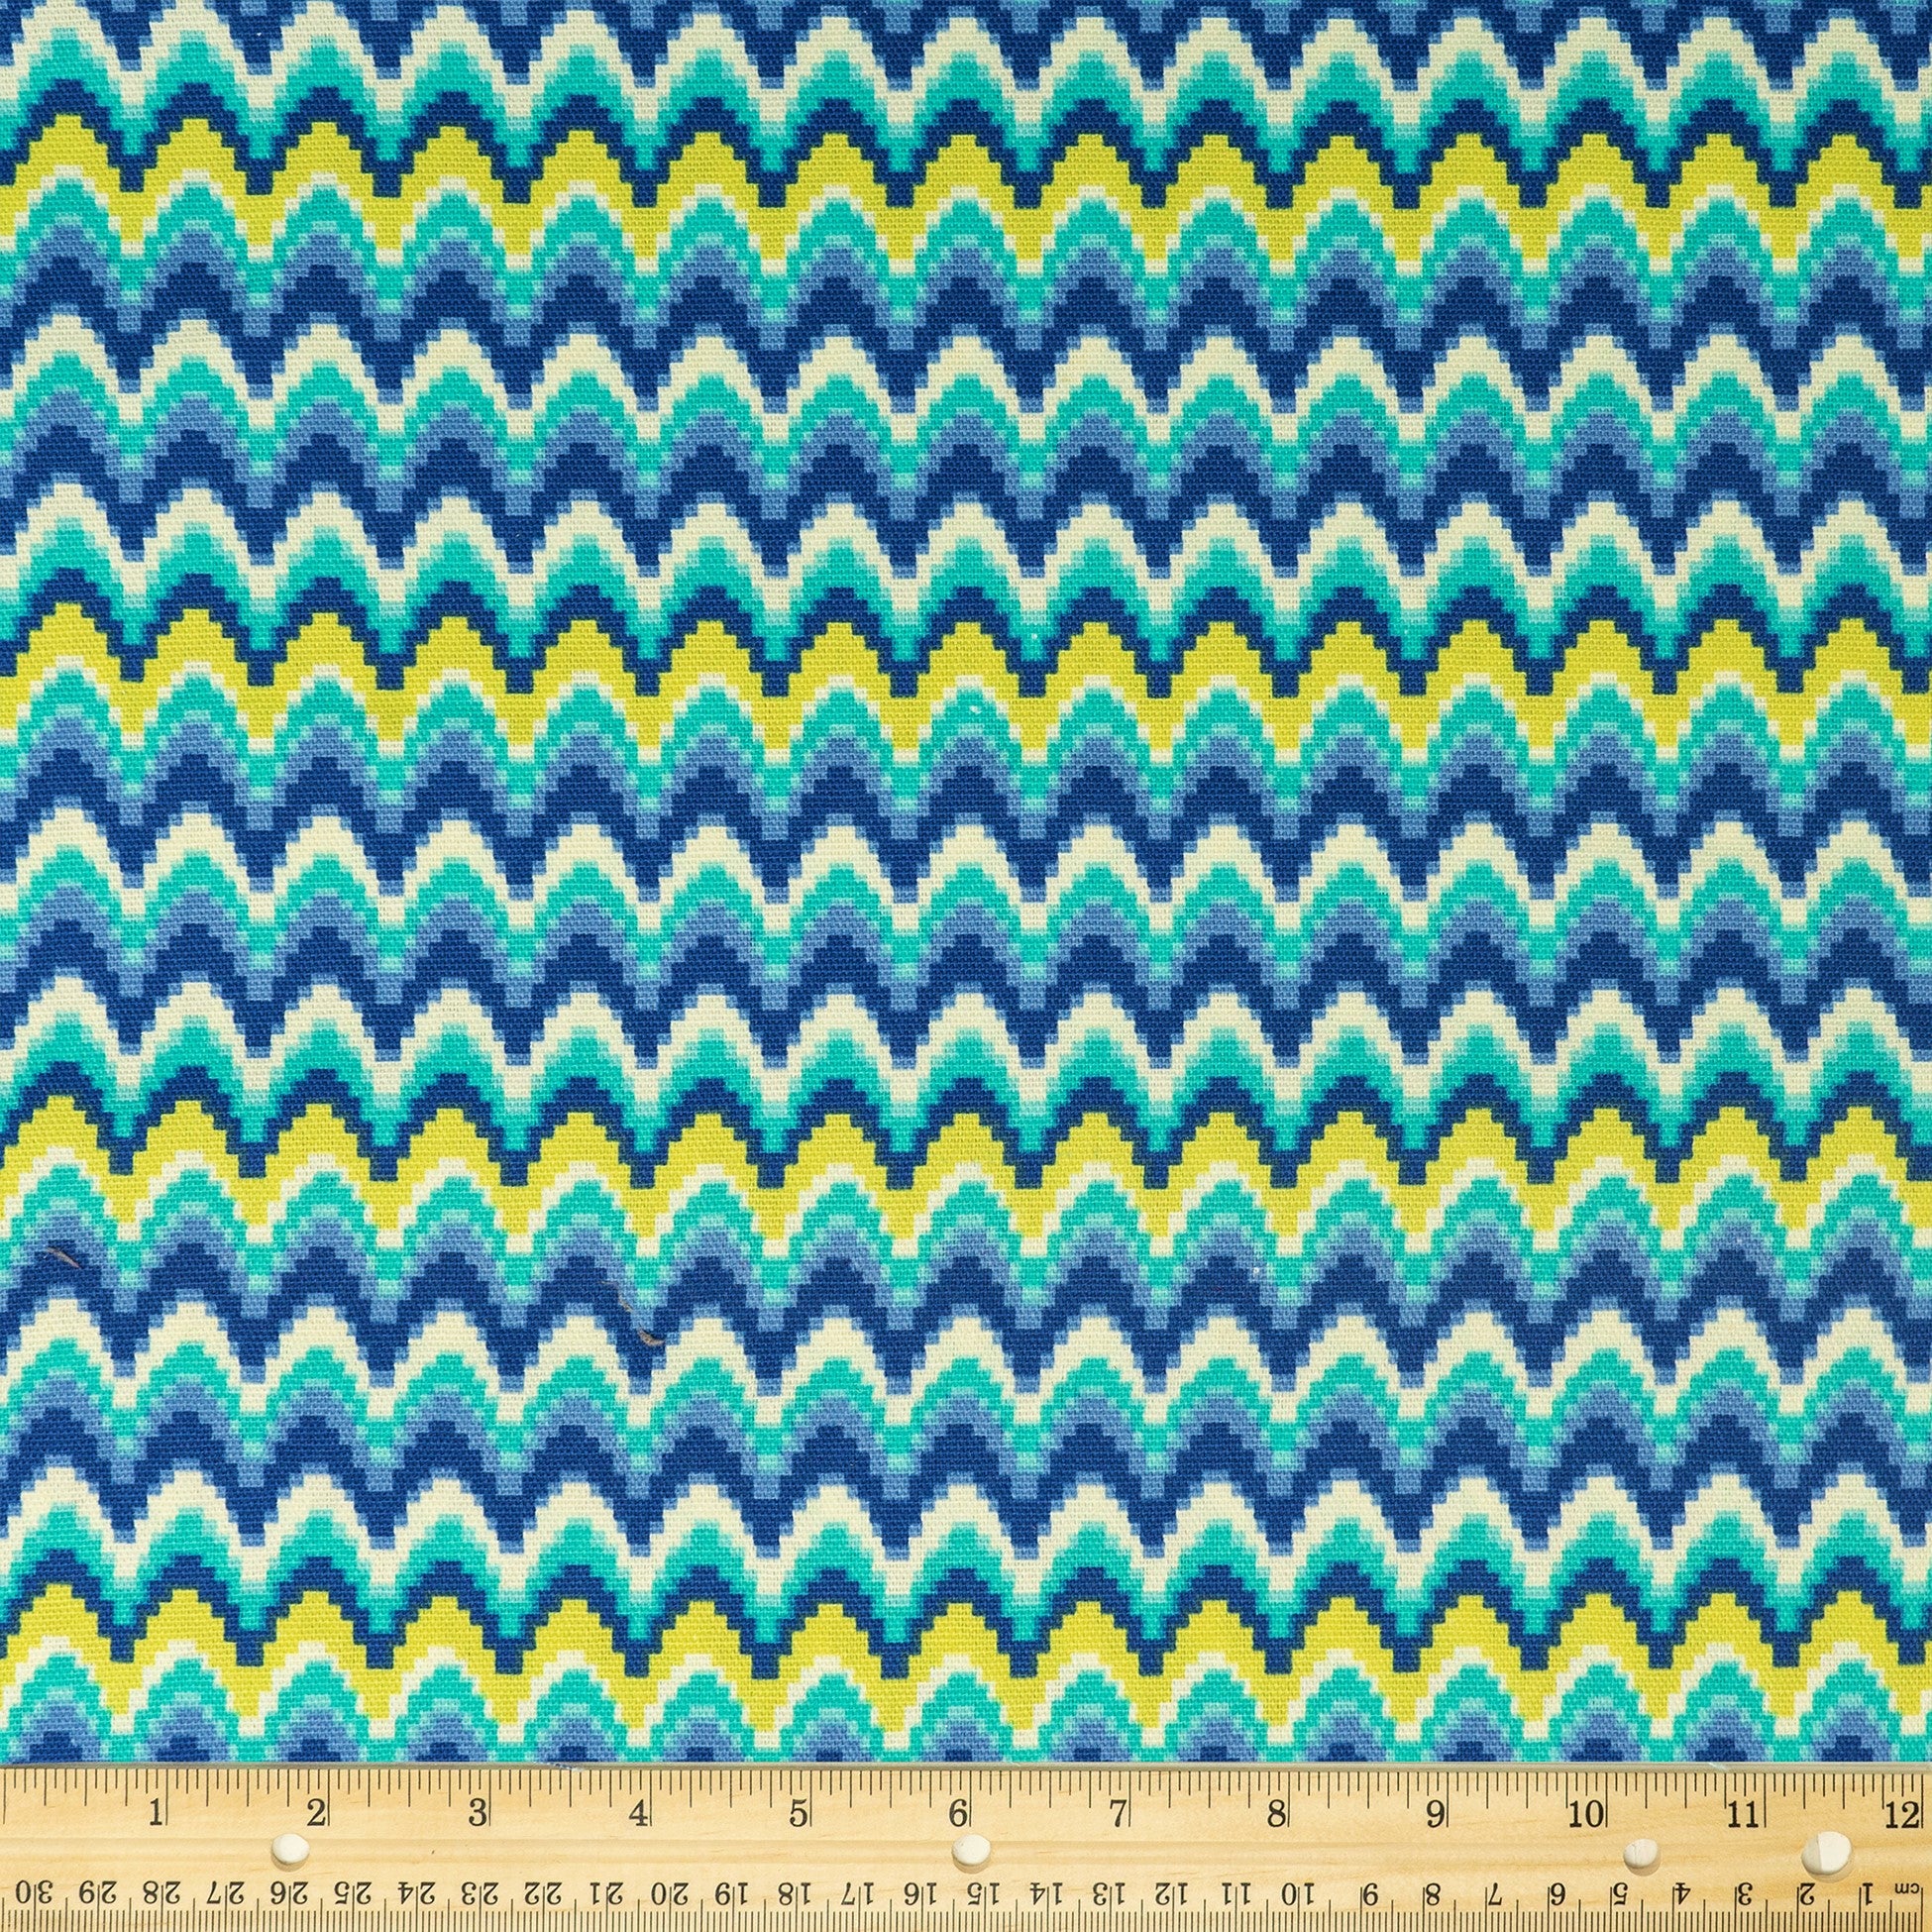 Waverly Inspirations 100% Cotton Duck 45" Width Ikat Azure Color Sewing Fabric by the Yard